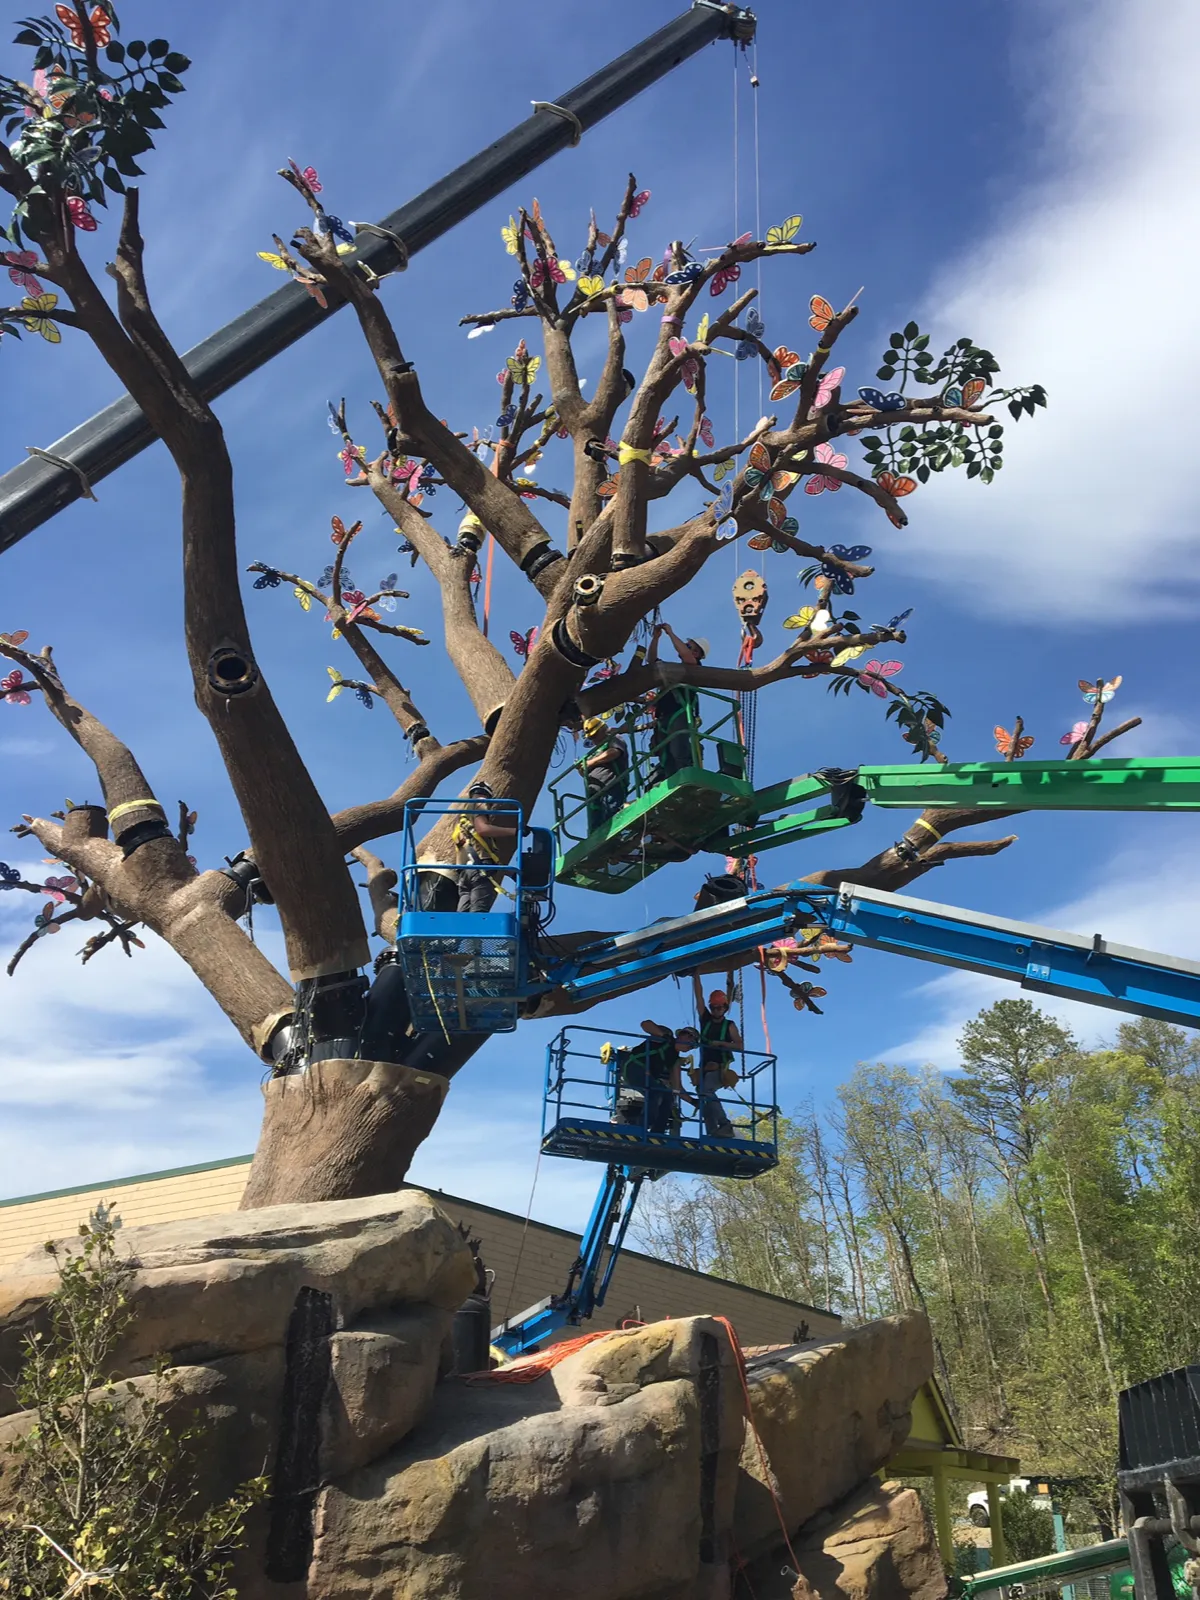 Cranes and people working on assembling the limbs of the Dollywood tree.